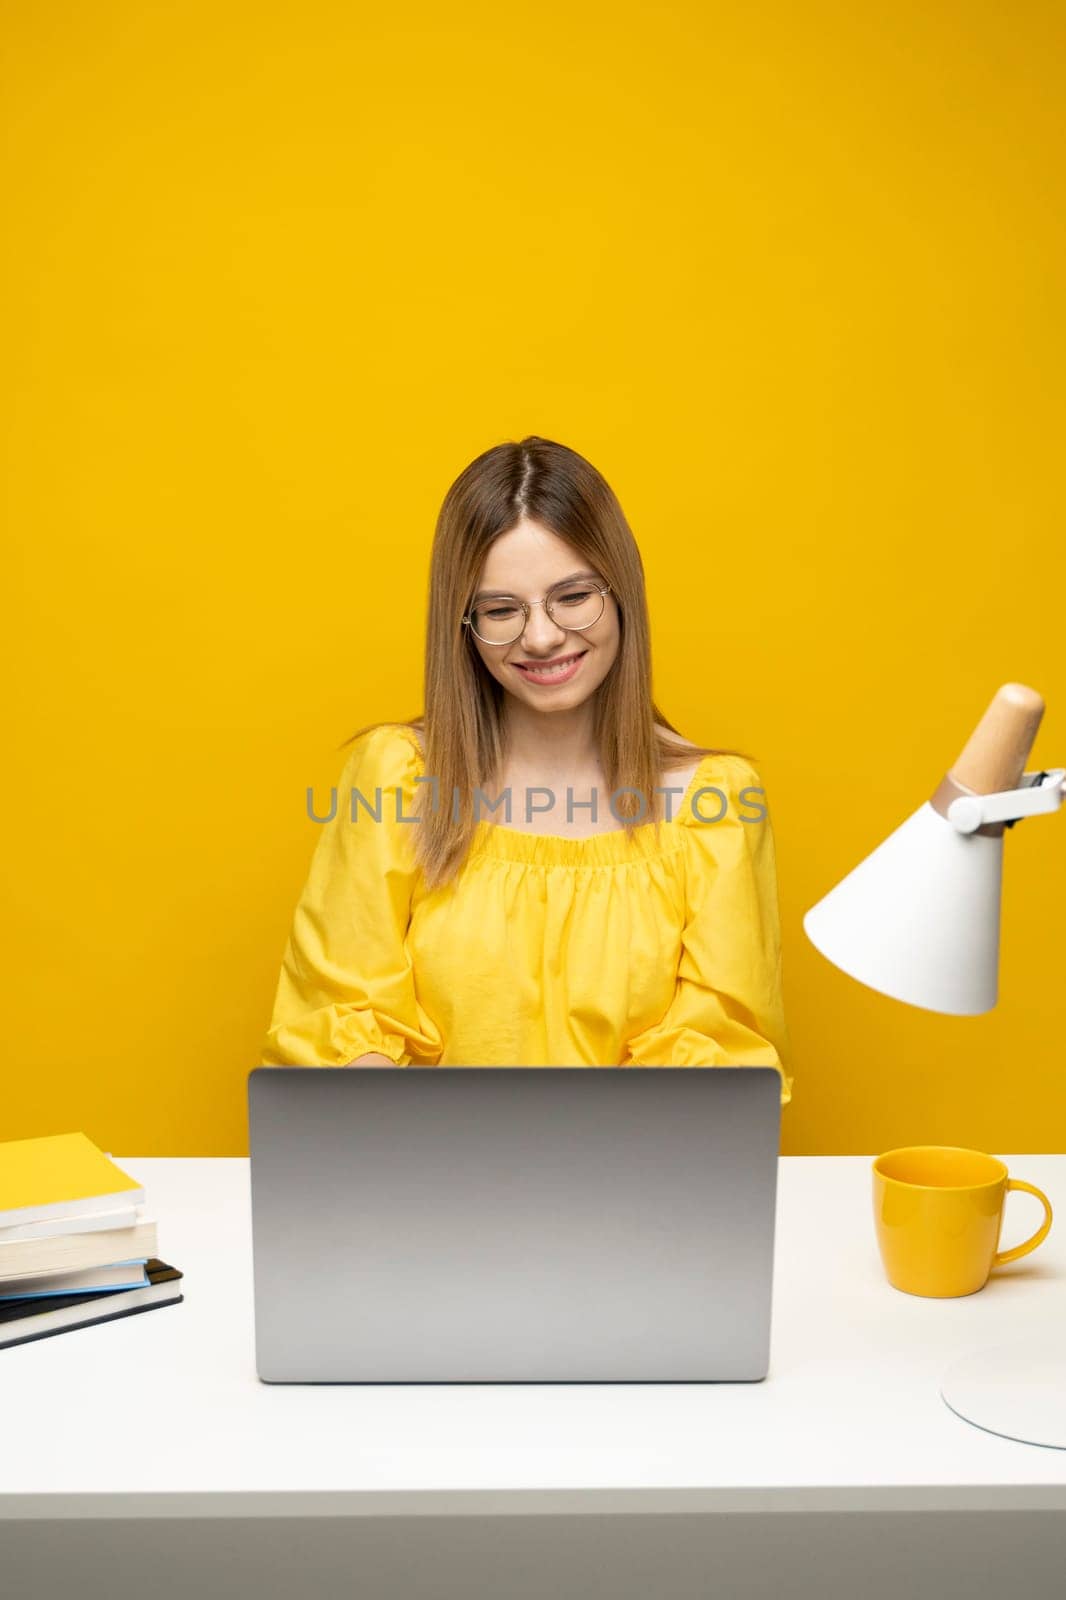 Portrait of Smiling pretty young woman studying while sitting at the table with grey laptop computer, notebook. Business woman working with a laptop isolated on a yellow background